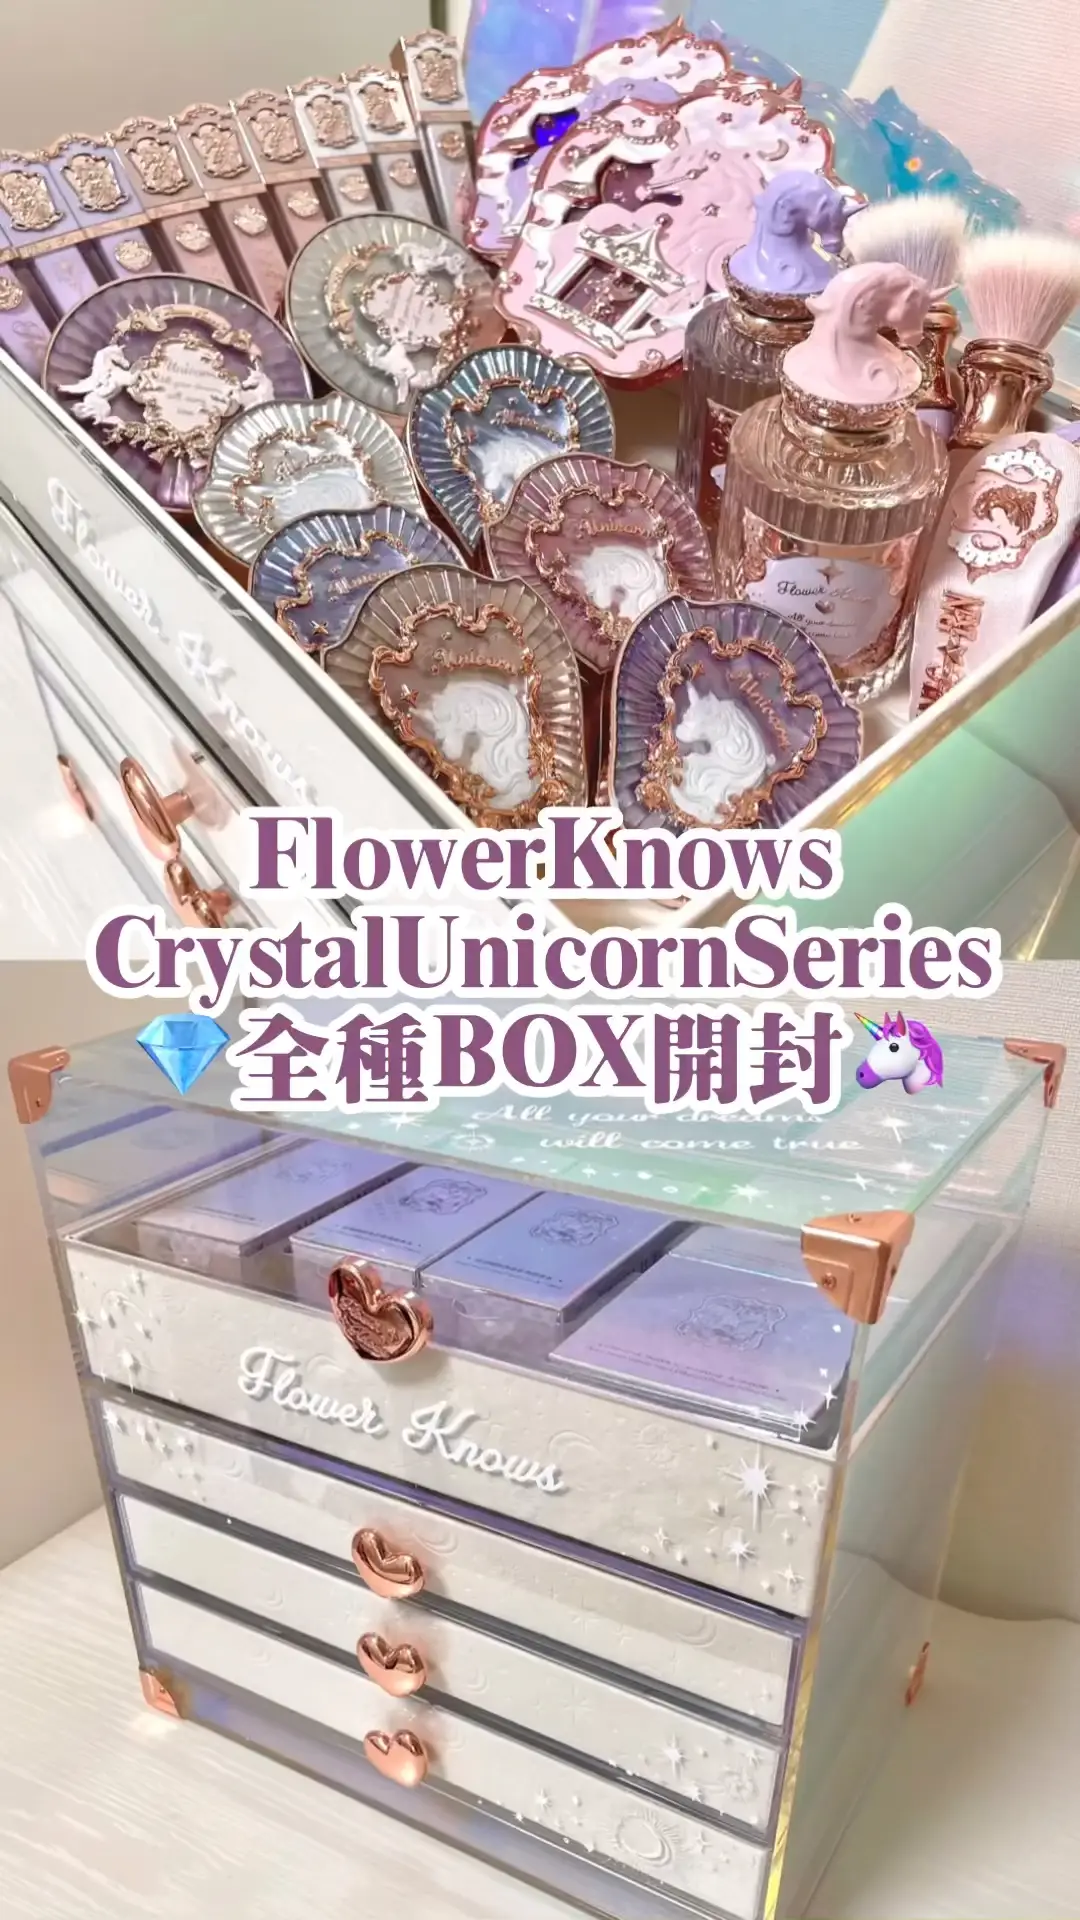 FlowerKnowsチョコレートシリーズ ALL in 全種フルボックス